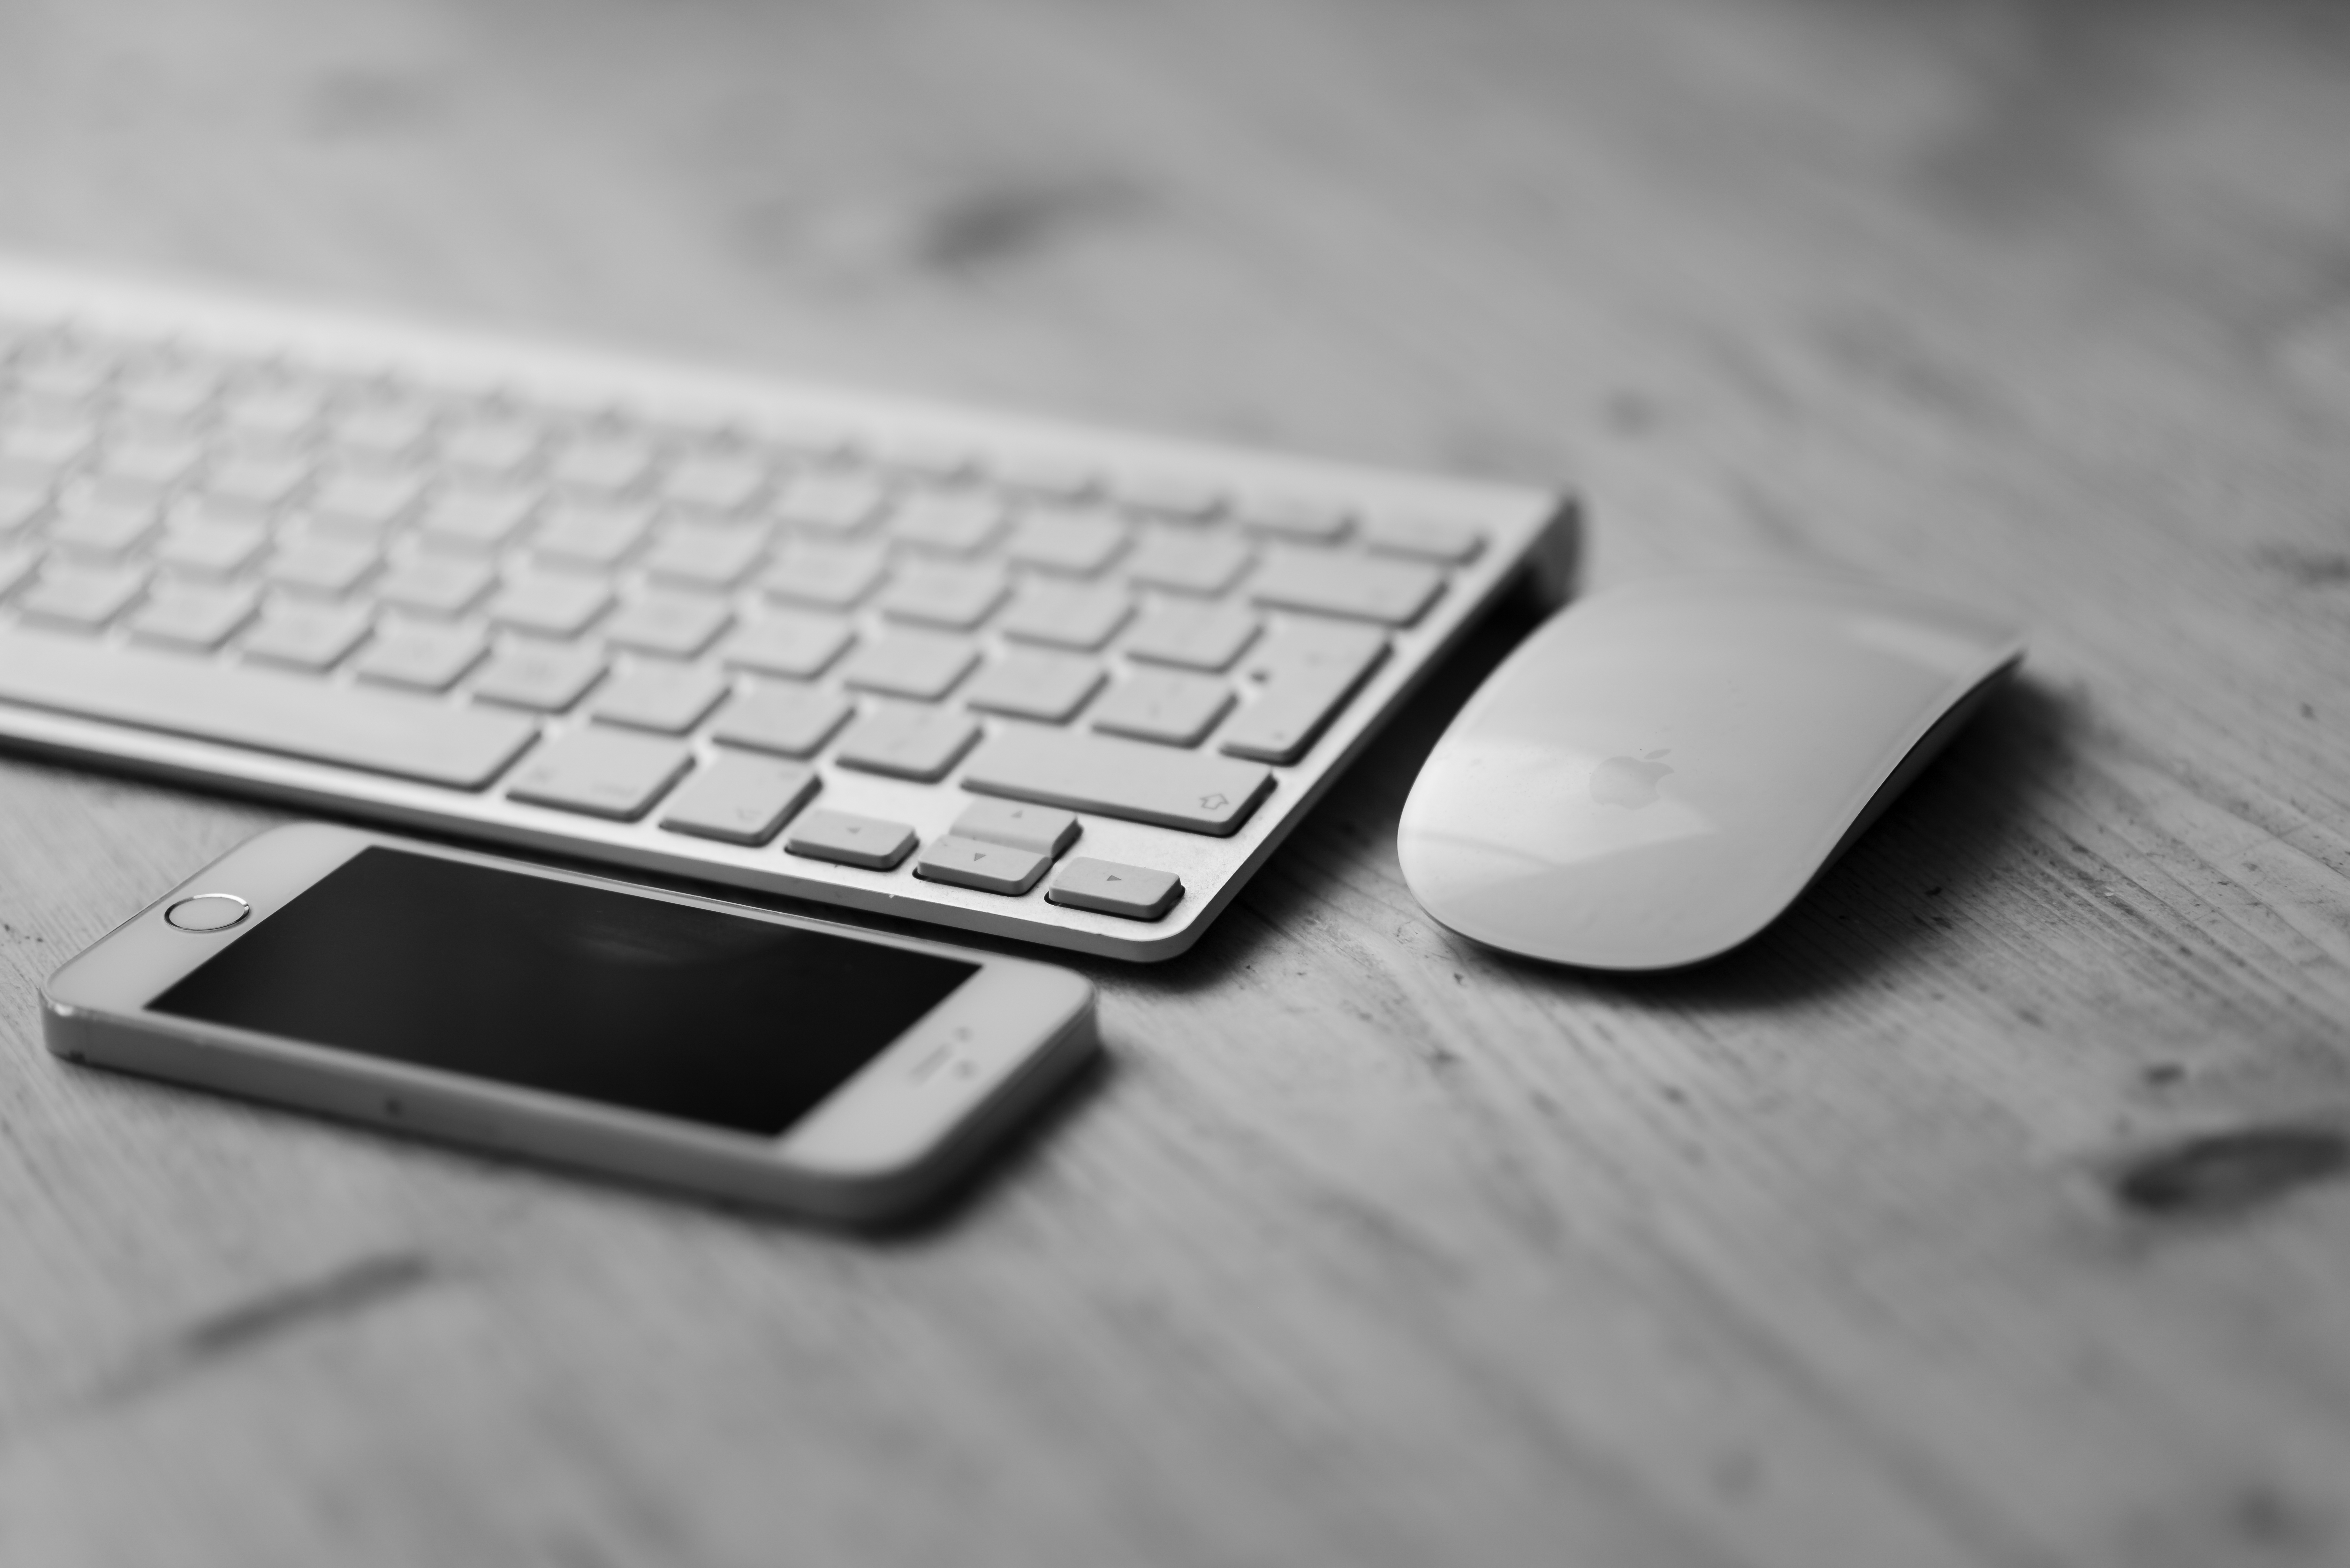 Free Images : laptop, iphone, desk, smartphone, black and white ...